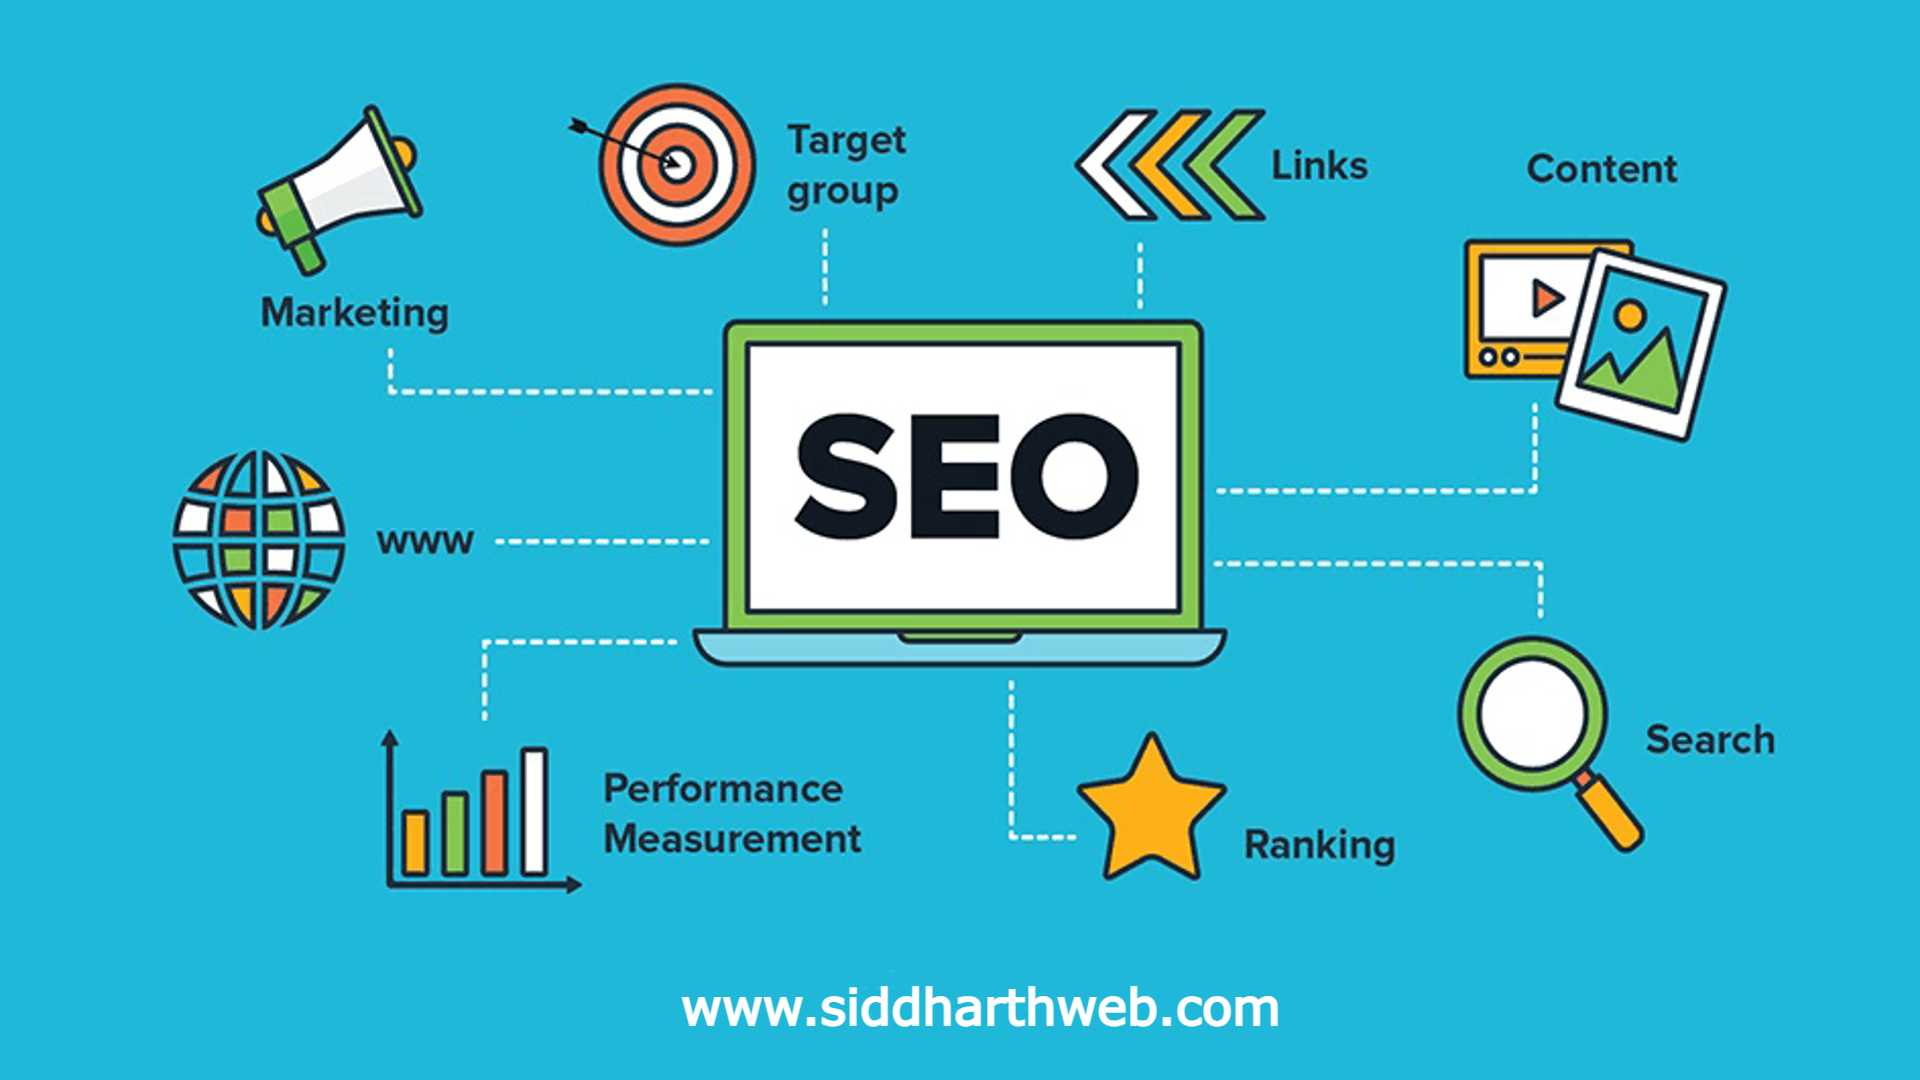 What are the kinds of SEO?